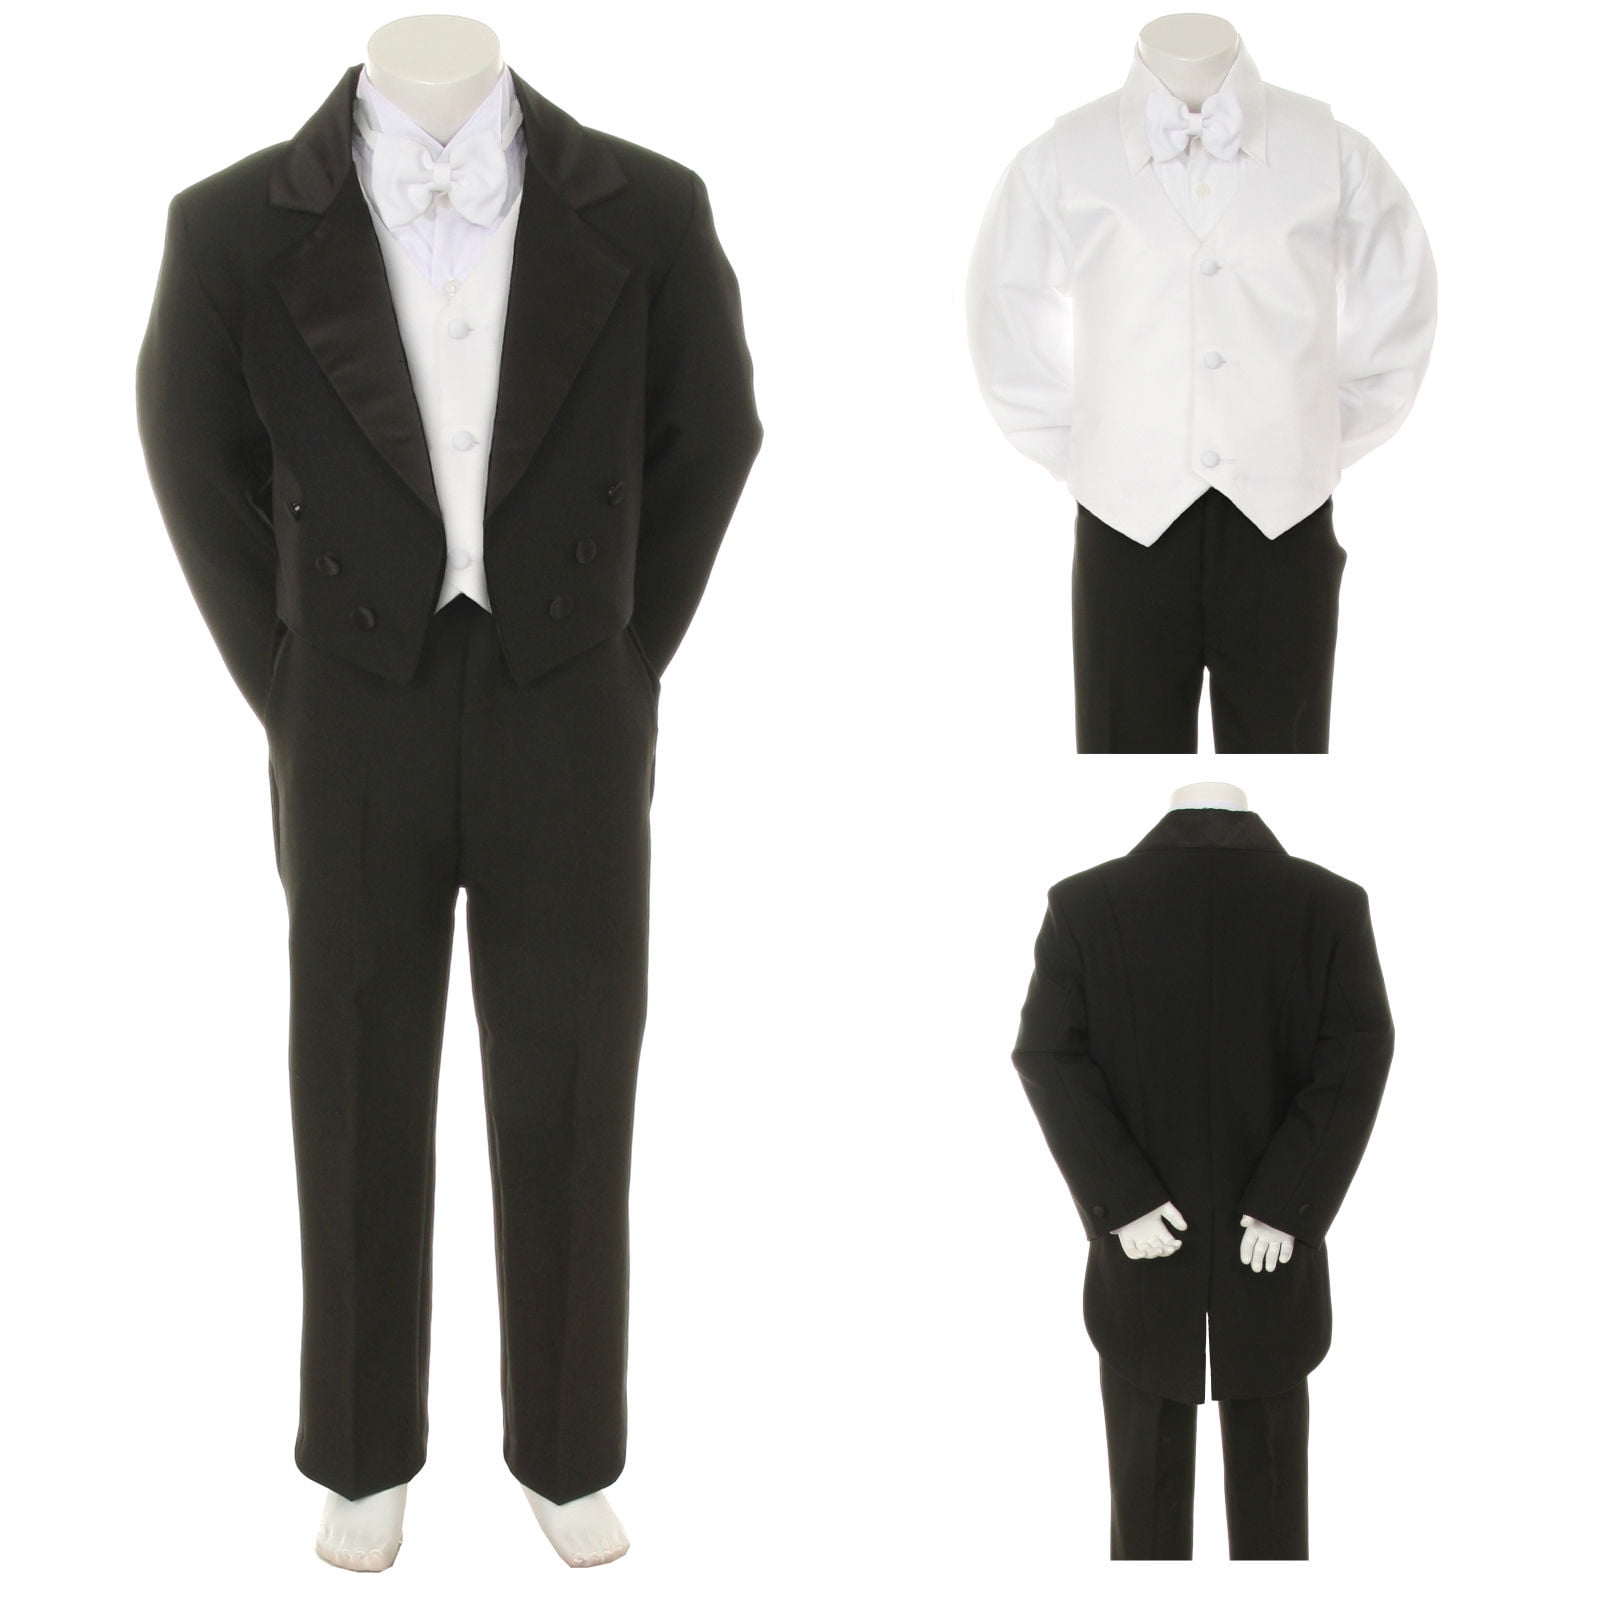 New Baby Boy & Toddler Wedding Tuxedo Easter Formal Party Suit S M XL 2T Black 